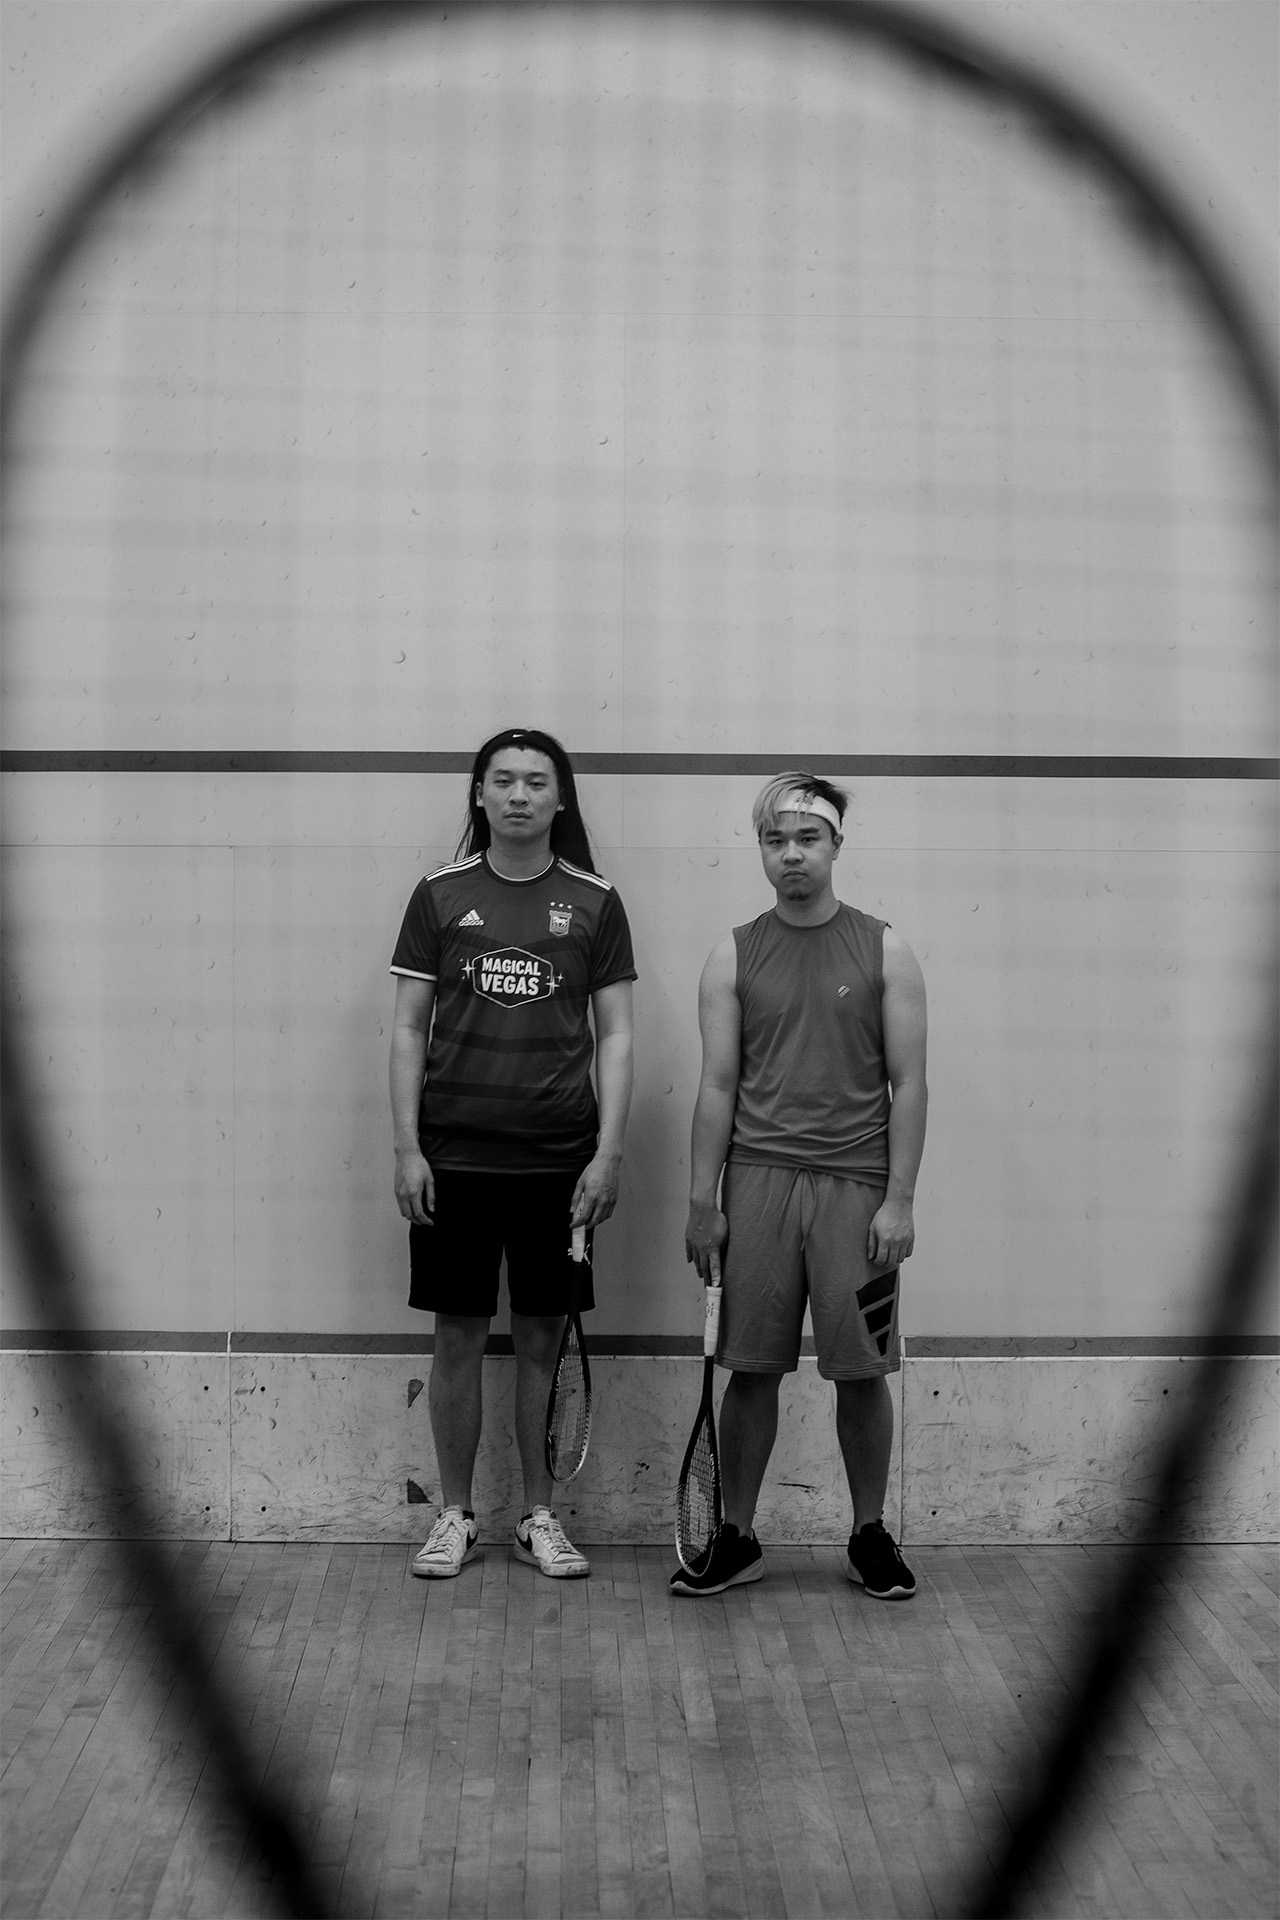 Squash: My homies Aaron and Mark looking deadpan into the camera on a squash court while the camera peers through a squash racket